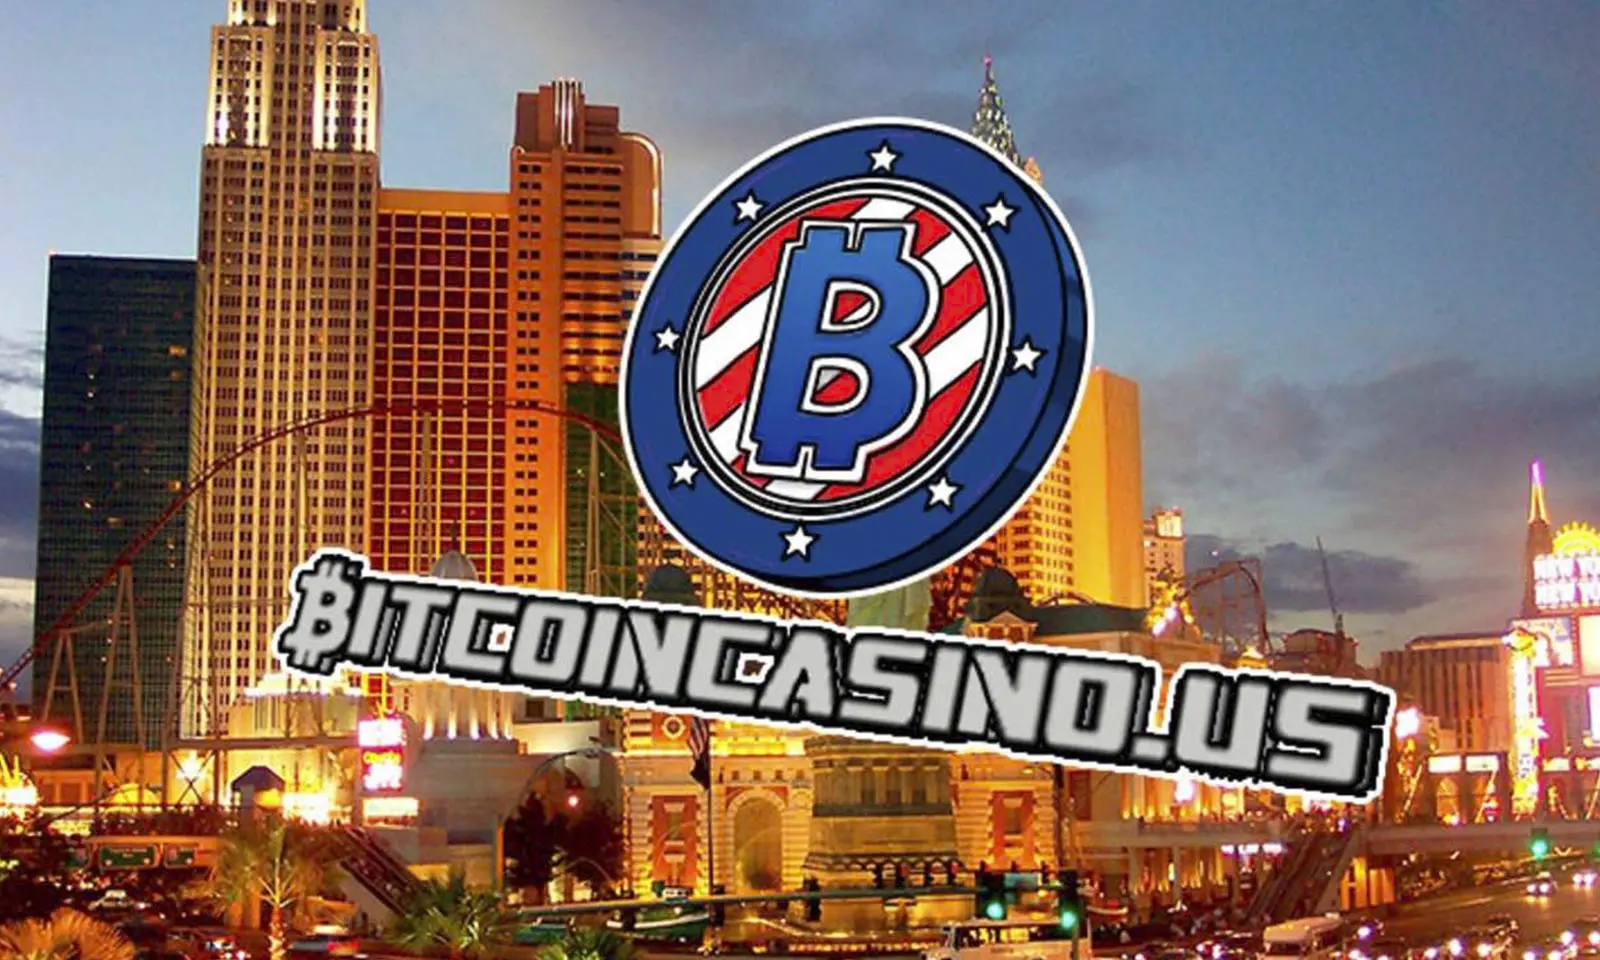 BitcoinCasino.us Invites Players to Join Monthly and Seasonal Tournaments